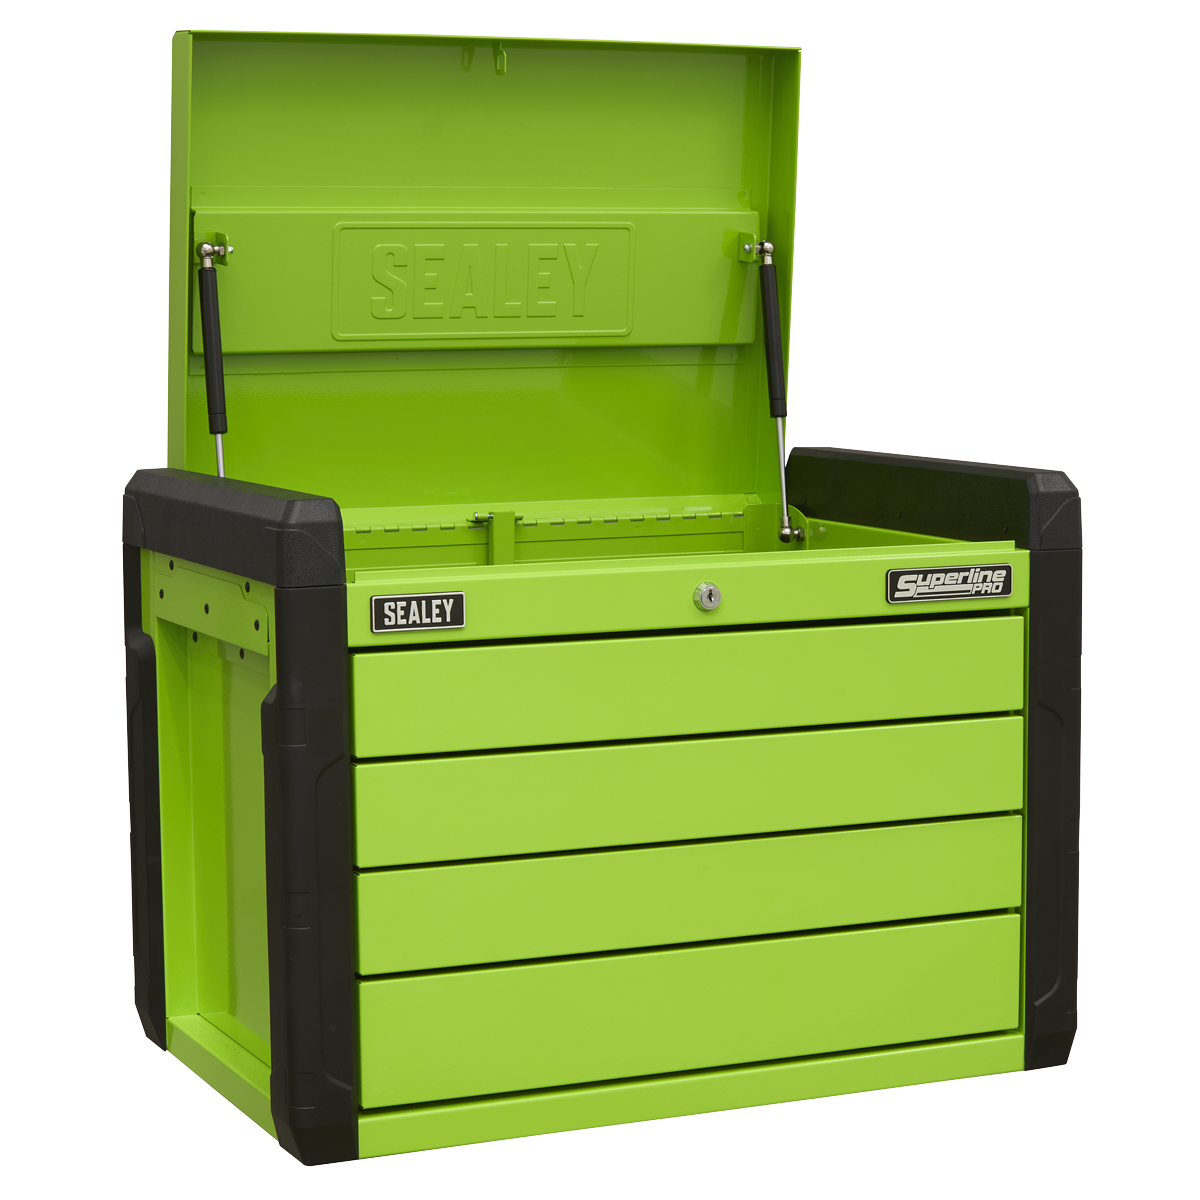 Sealey 4 Drawer Push-to-Open Topchest with Ball-Bearing Slides - Hi-Vis Green